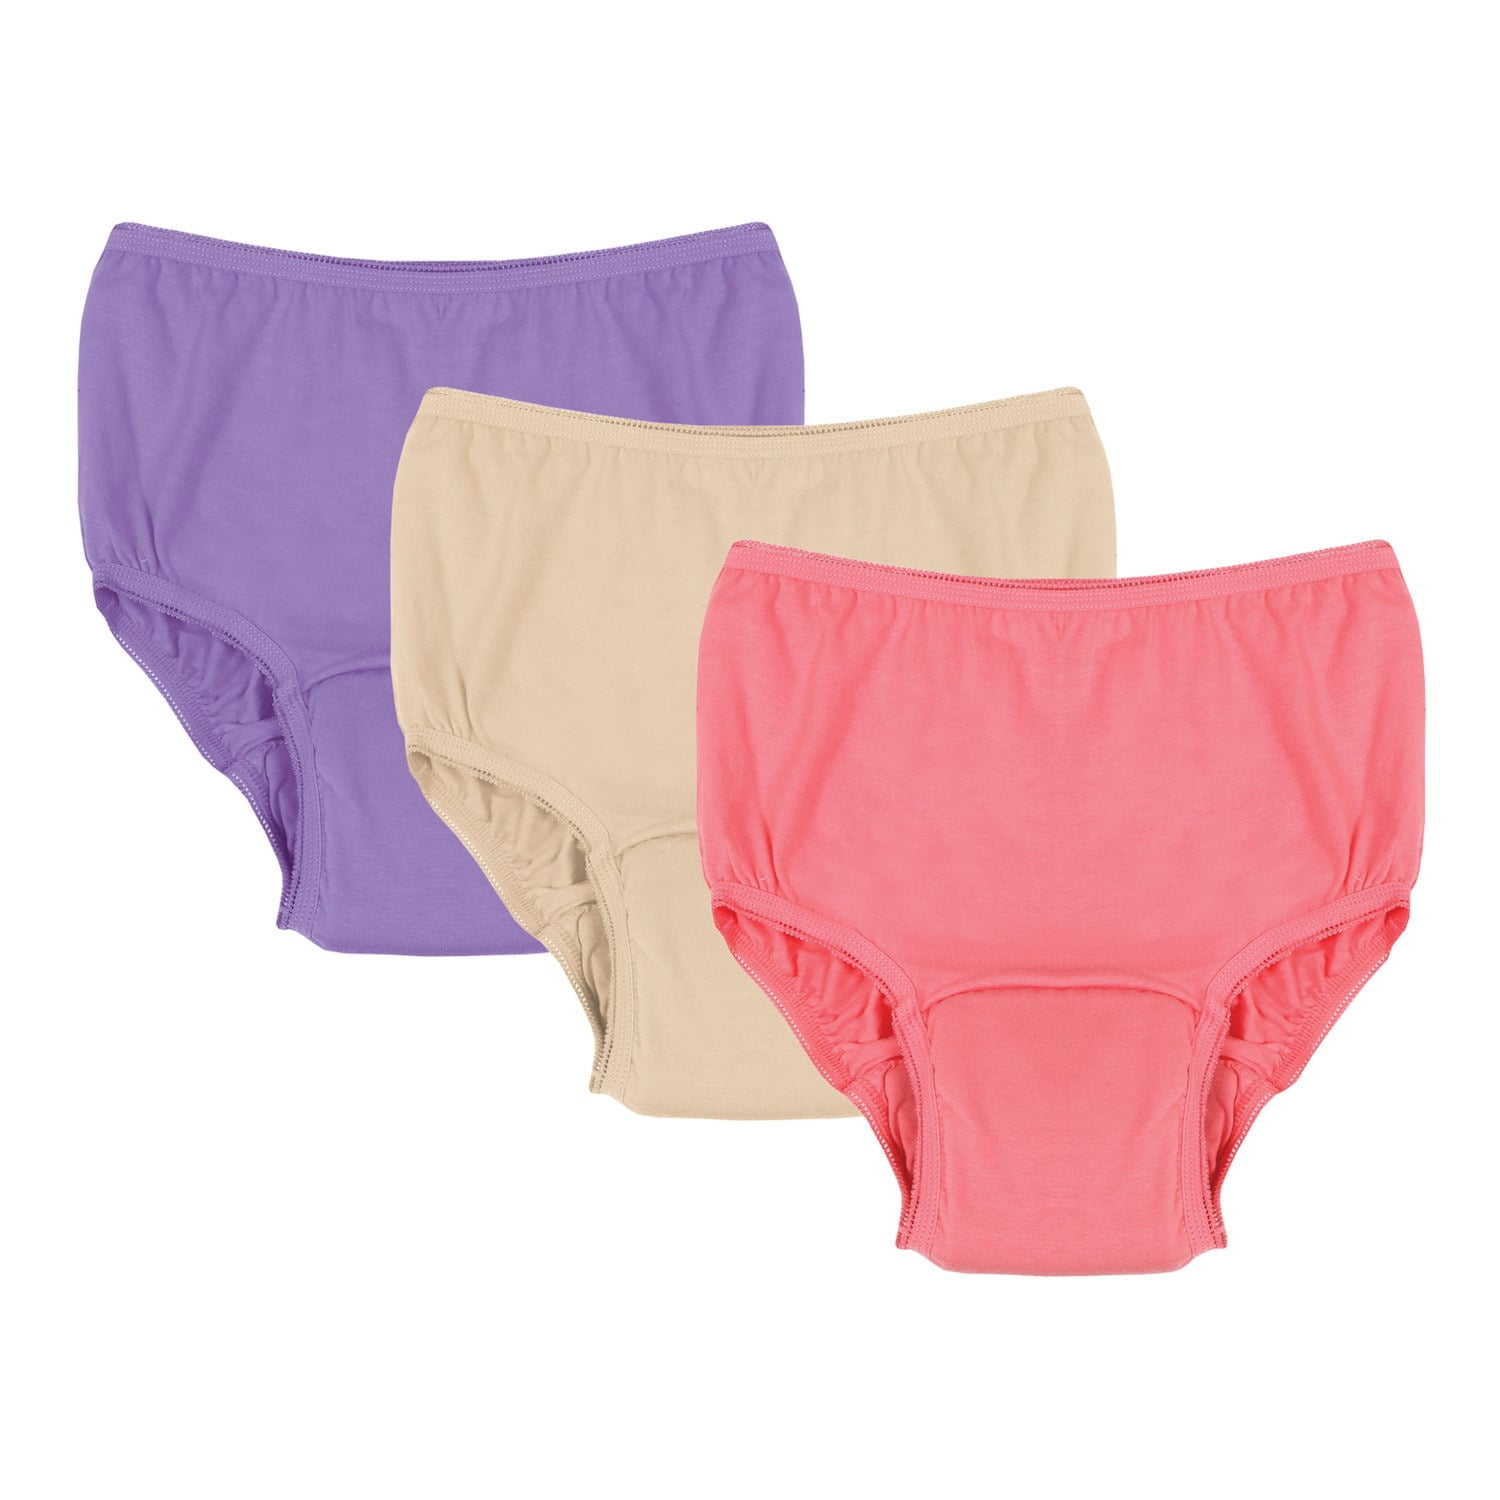 SUPPORT PLUS Womens Incontinence Underwear Washable Reusable 10 oz